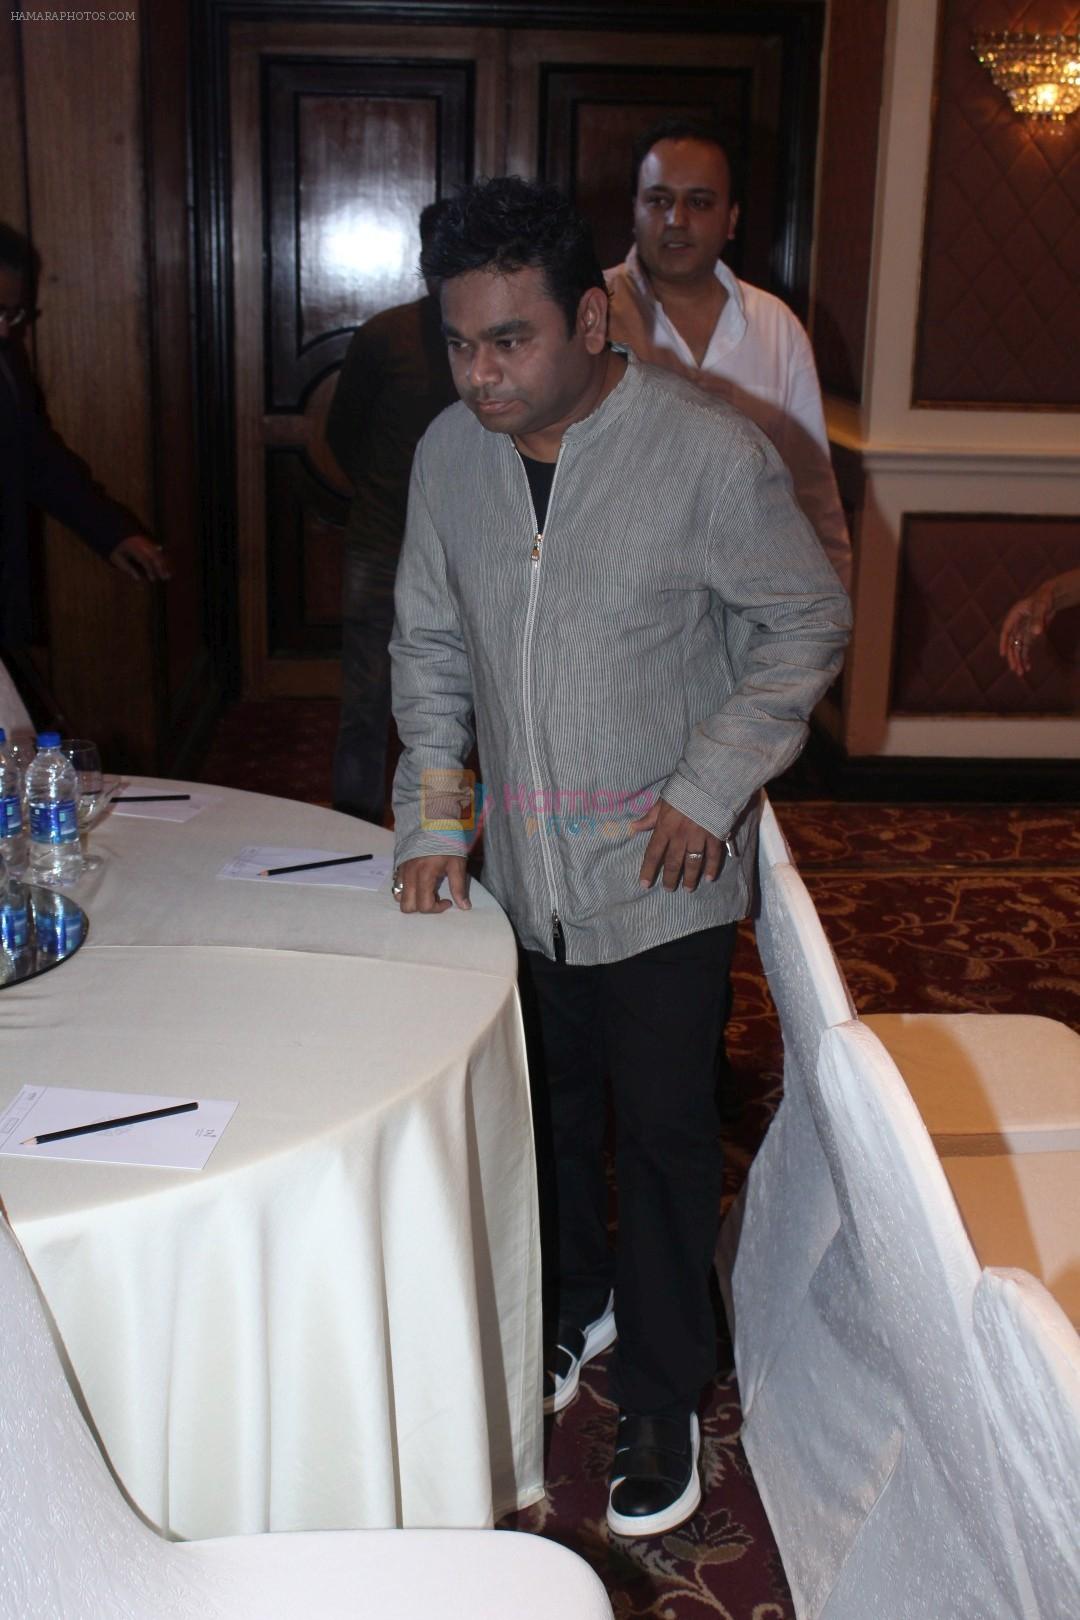 A. R. Rahman At Music Launch Of Film Partition 1947 on 4th July 2017